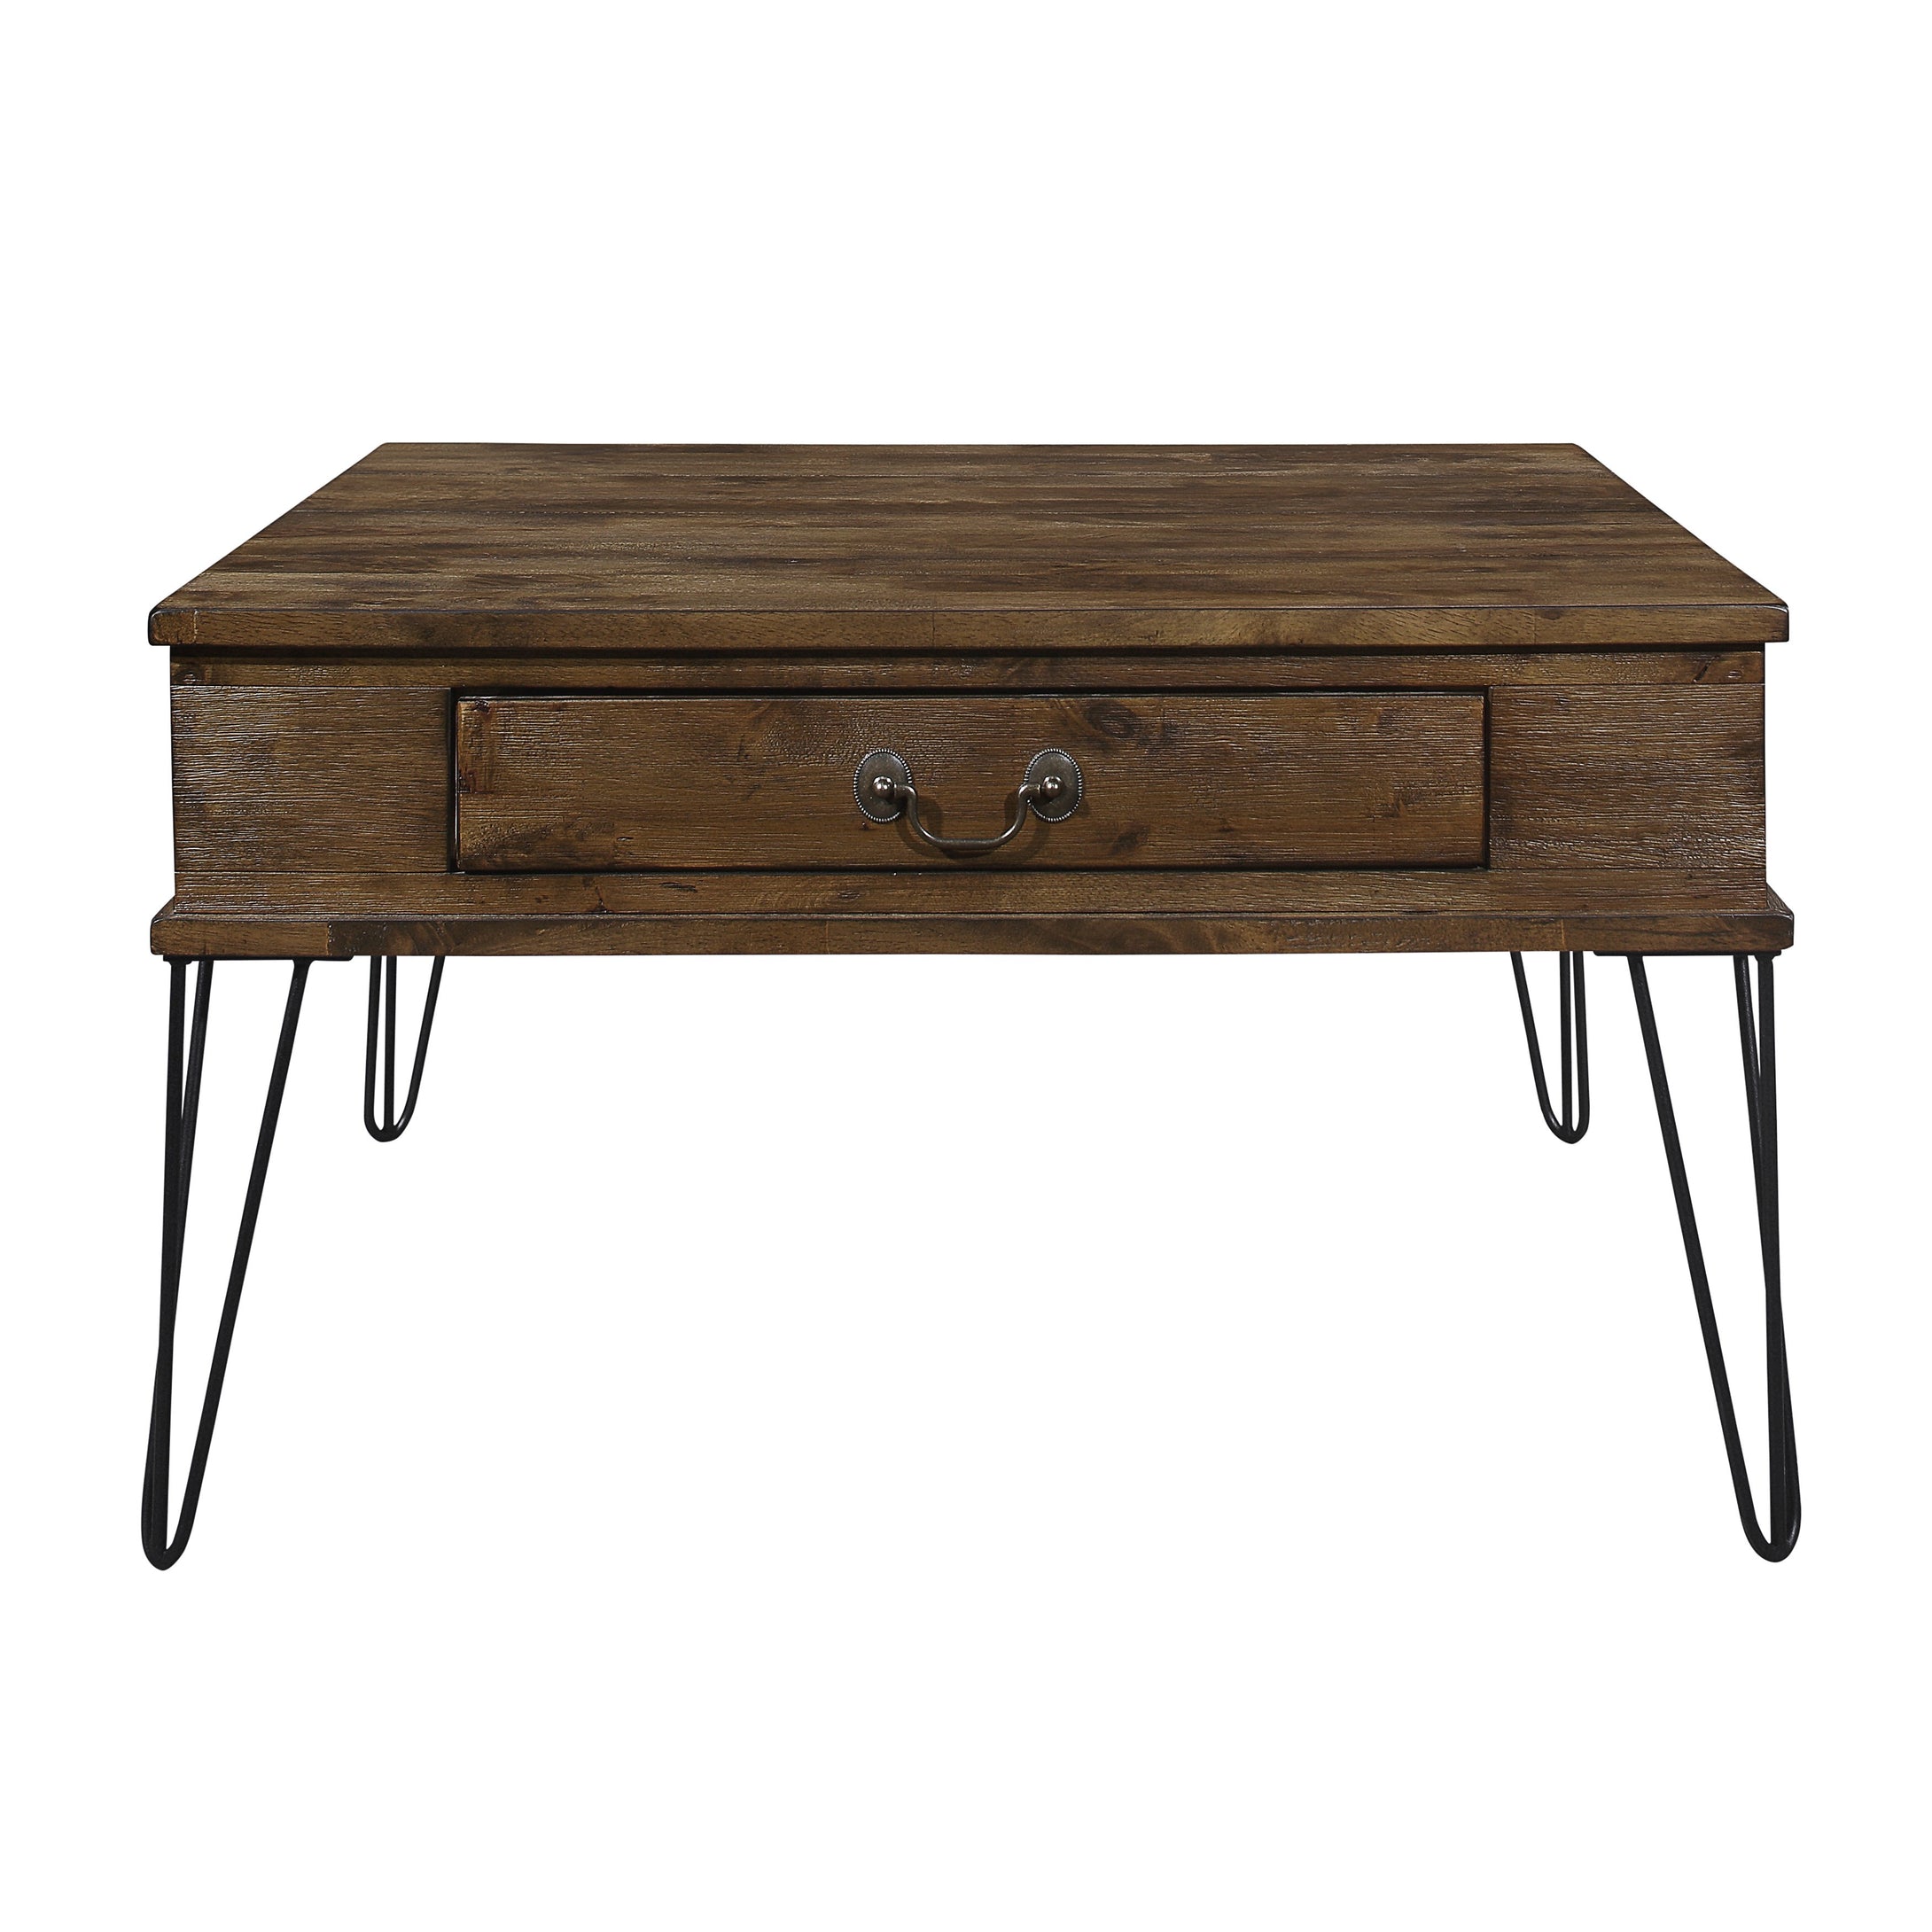 3670M-01 Square Cocktail Table